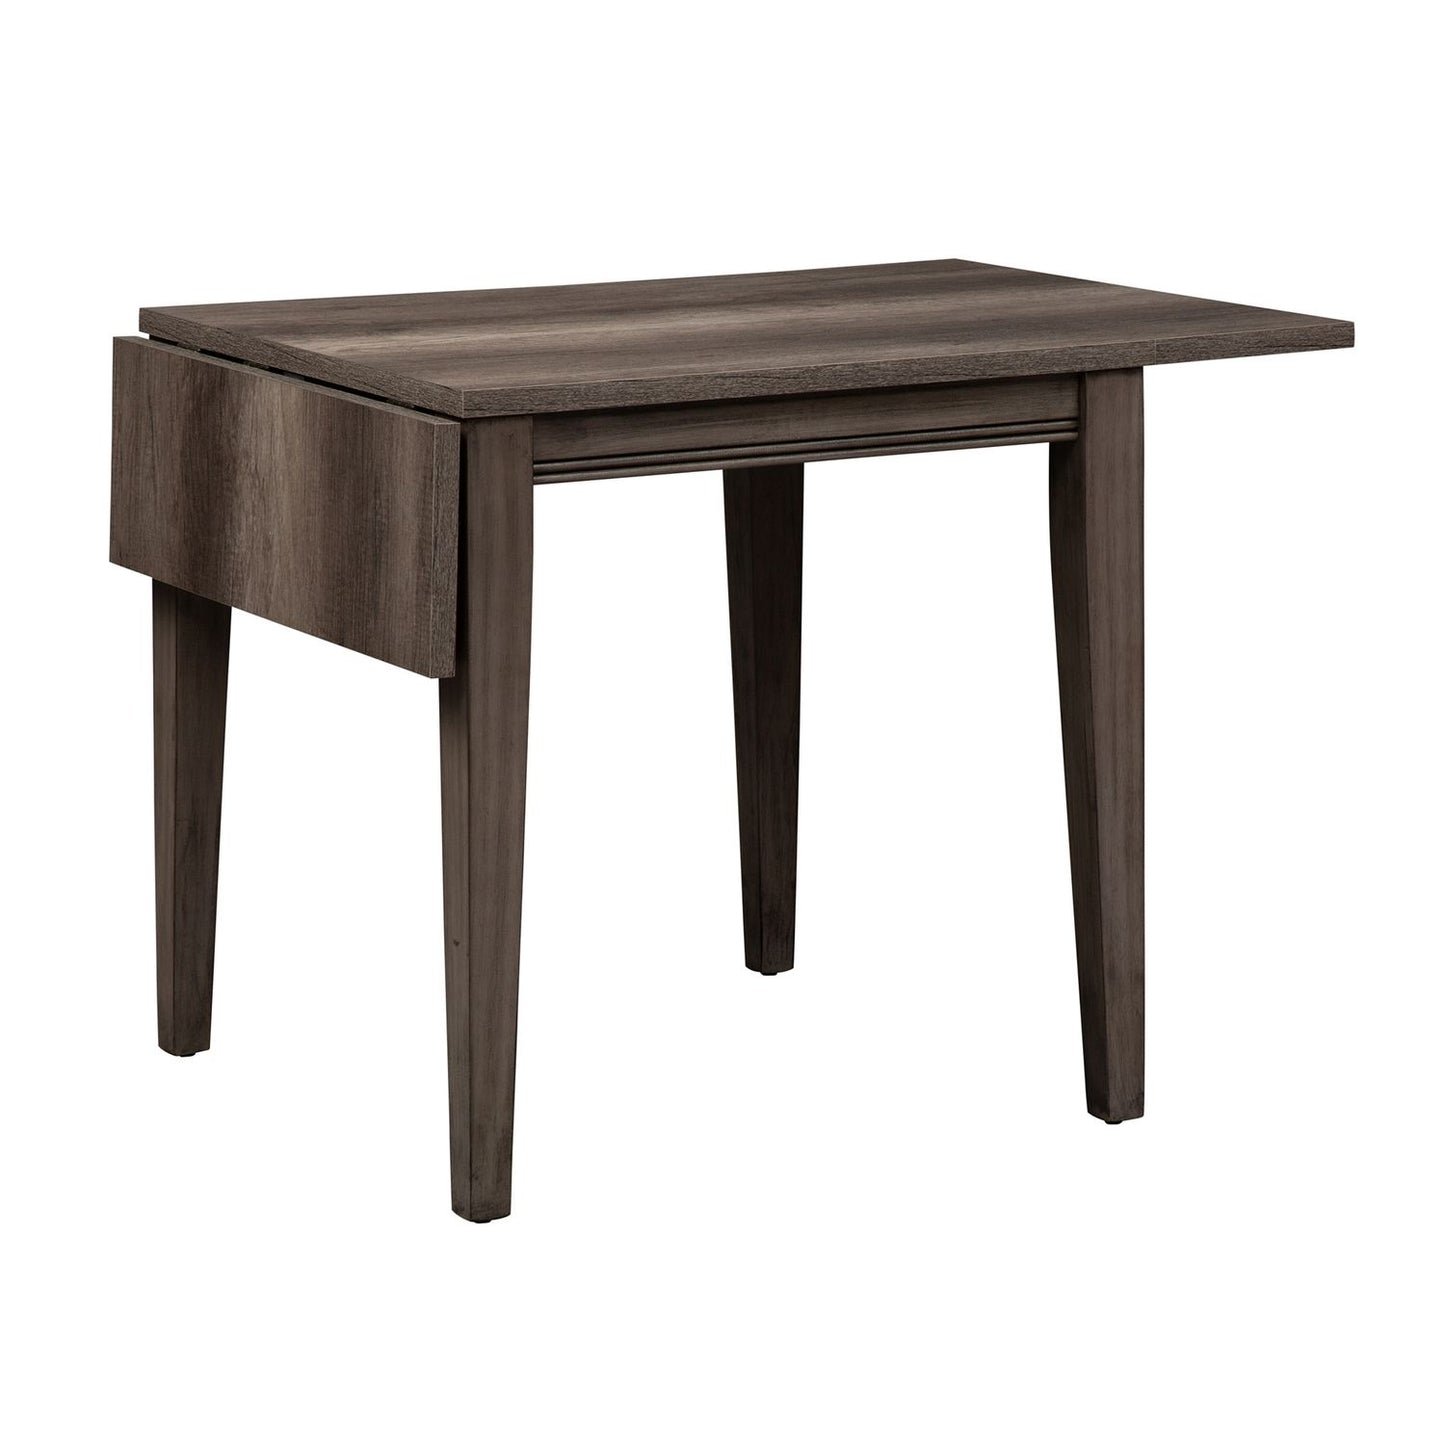 Tanners Creek Dining Table Drop Leaf Greystone Finish